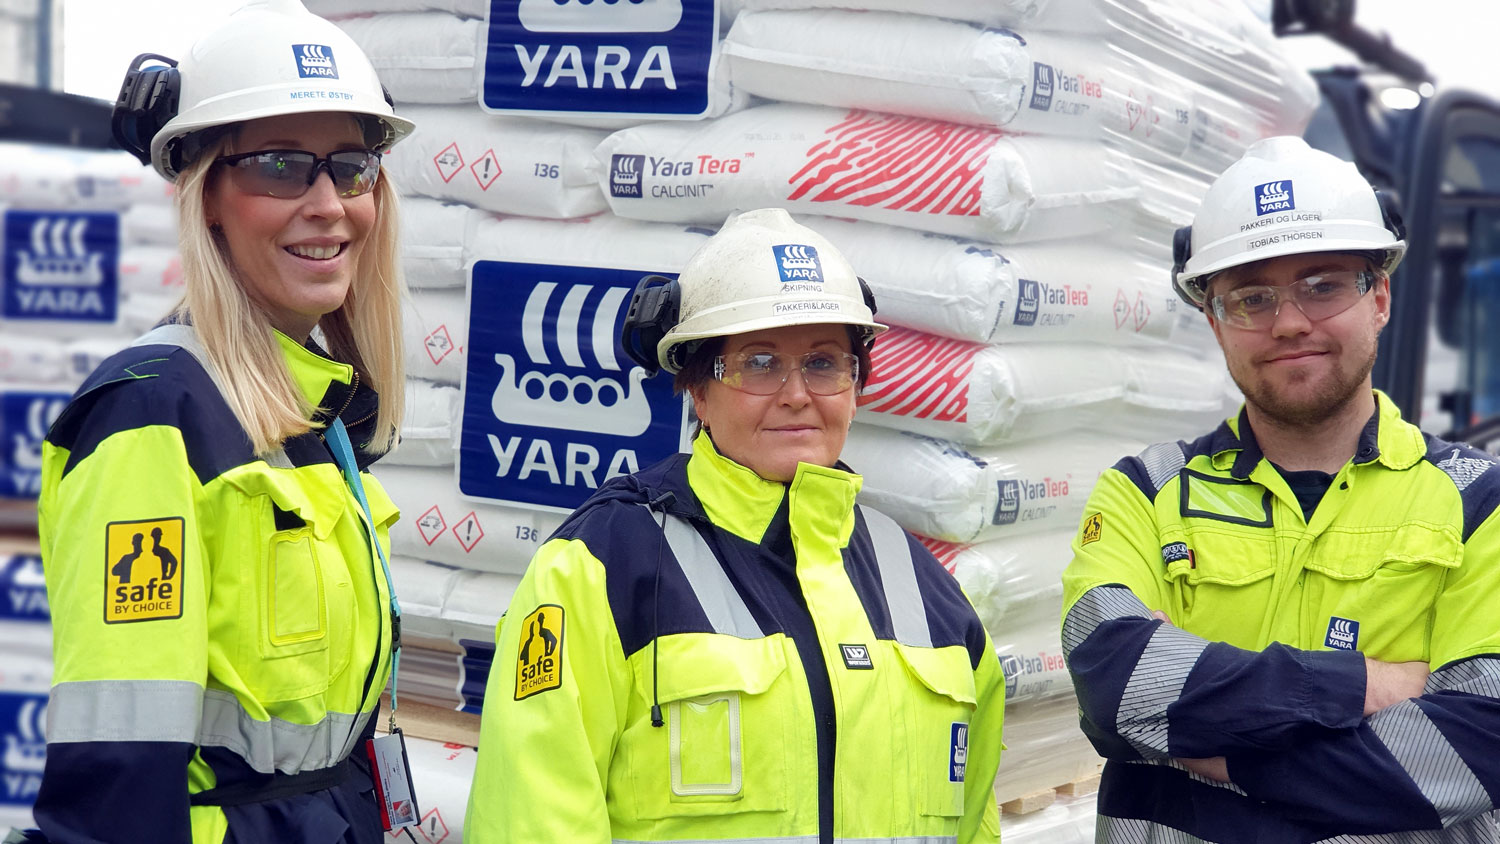 three persons, posing, work clothes, helmets, bags of fertiliser on a pallet